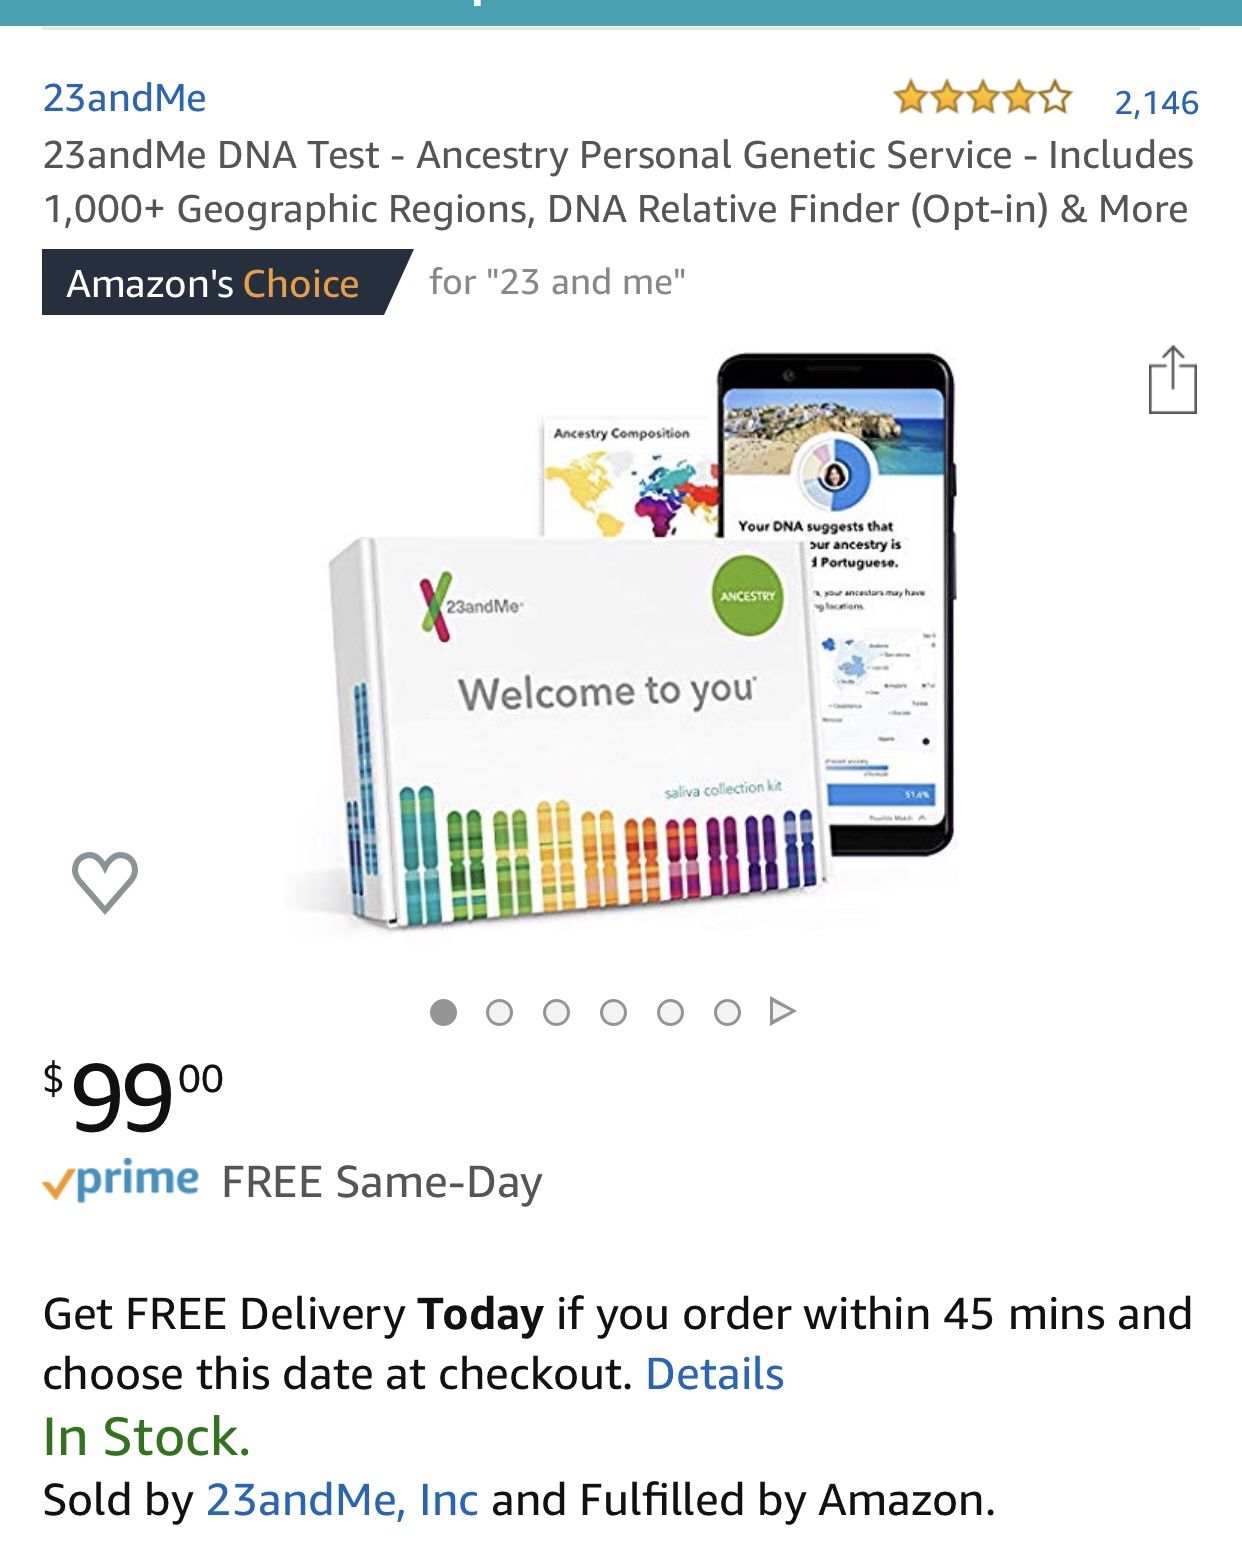 23andMe health and ancestry DNA saliva collection kit